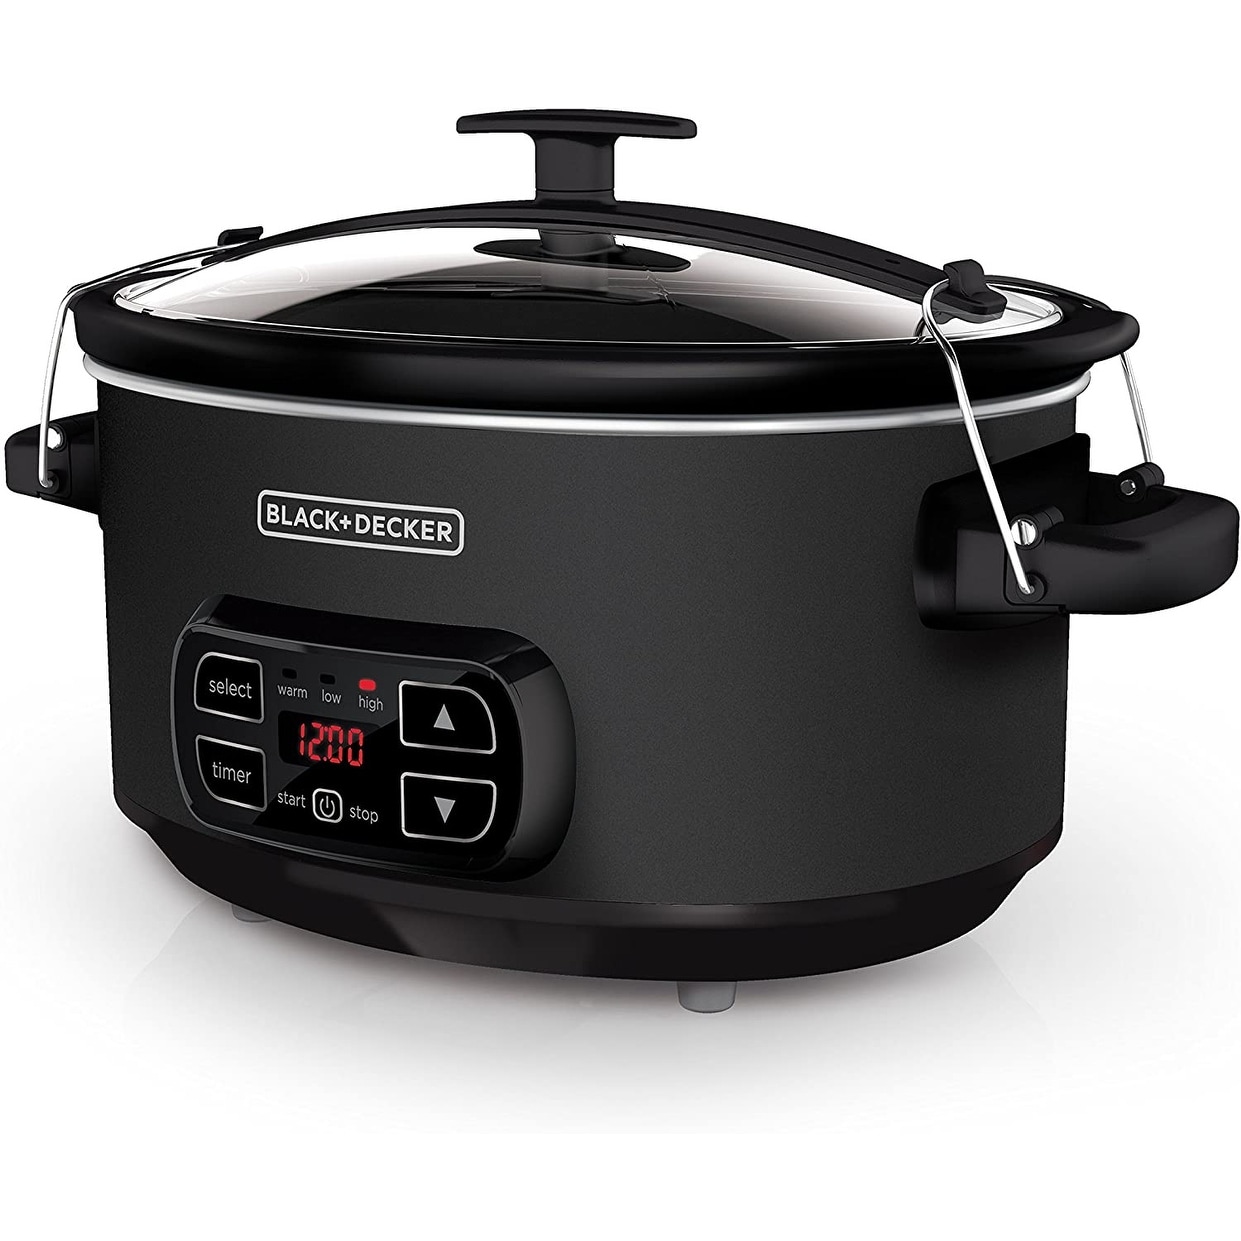 https://ak1.ostkcdn.com/images/products/is/images/direct/2fefea8046917006f54b0cc1681520d8925f4dcd/7-Quart-Digital-Slow-Cooker-with-Chalkboard-Surface.jpg